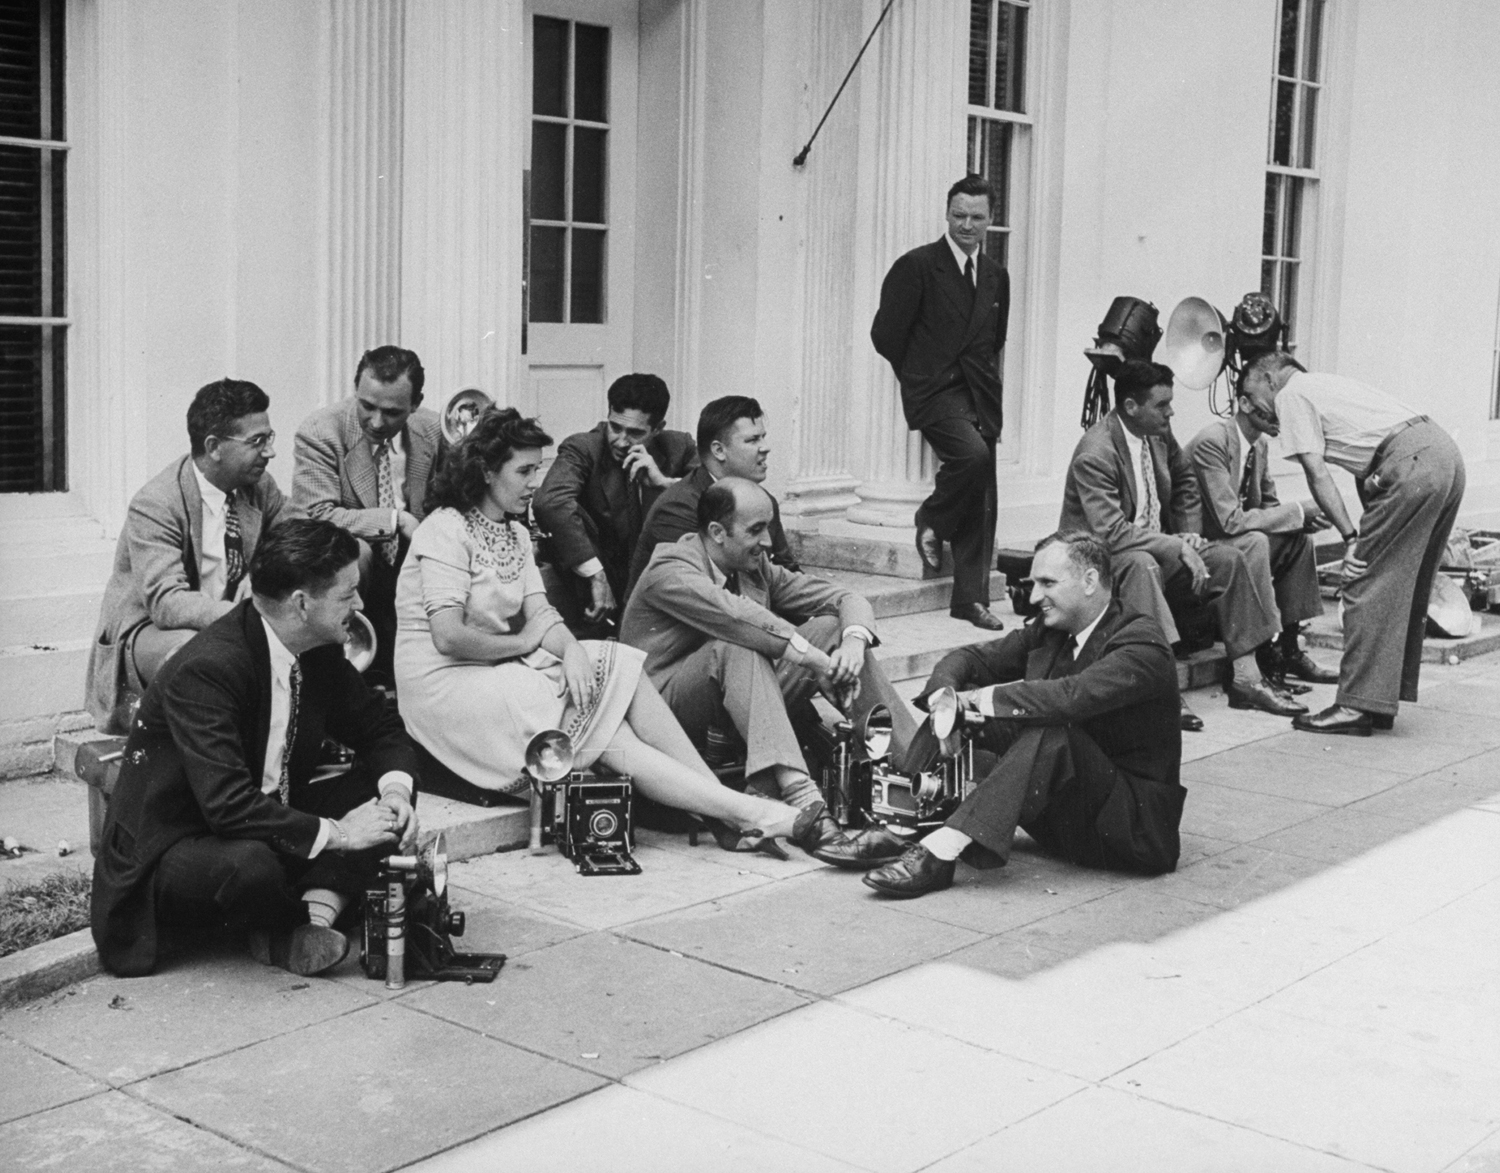 Reporters wait outside the White House for news of Japan's surrender, 1945.